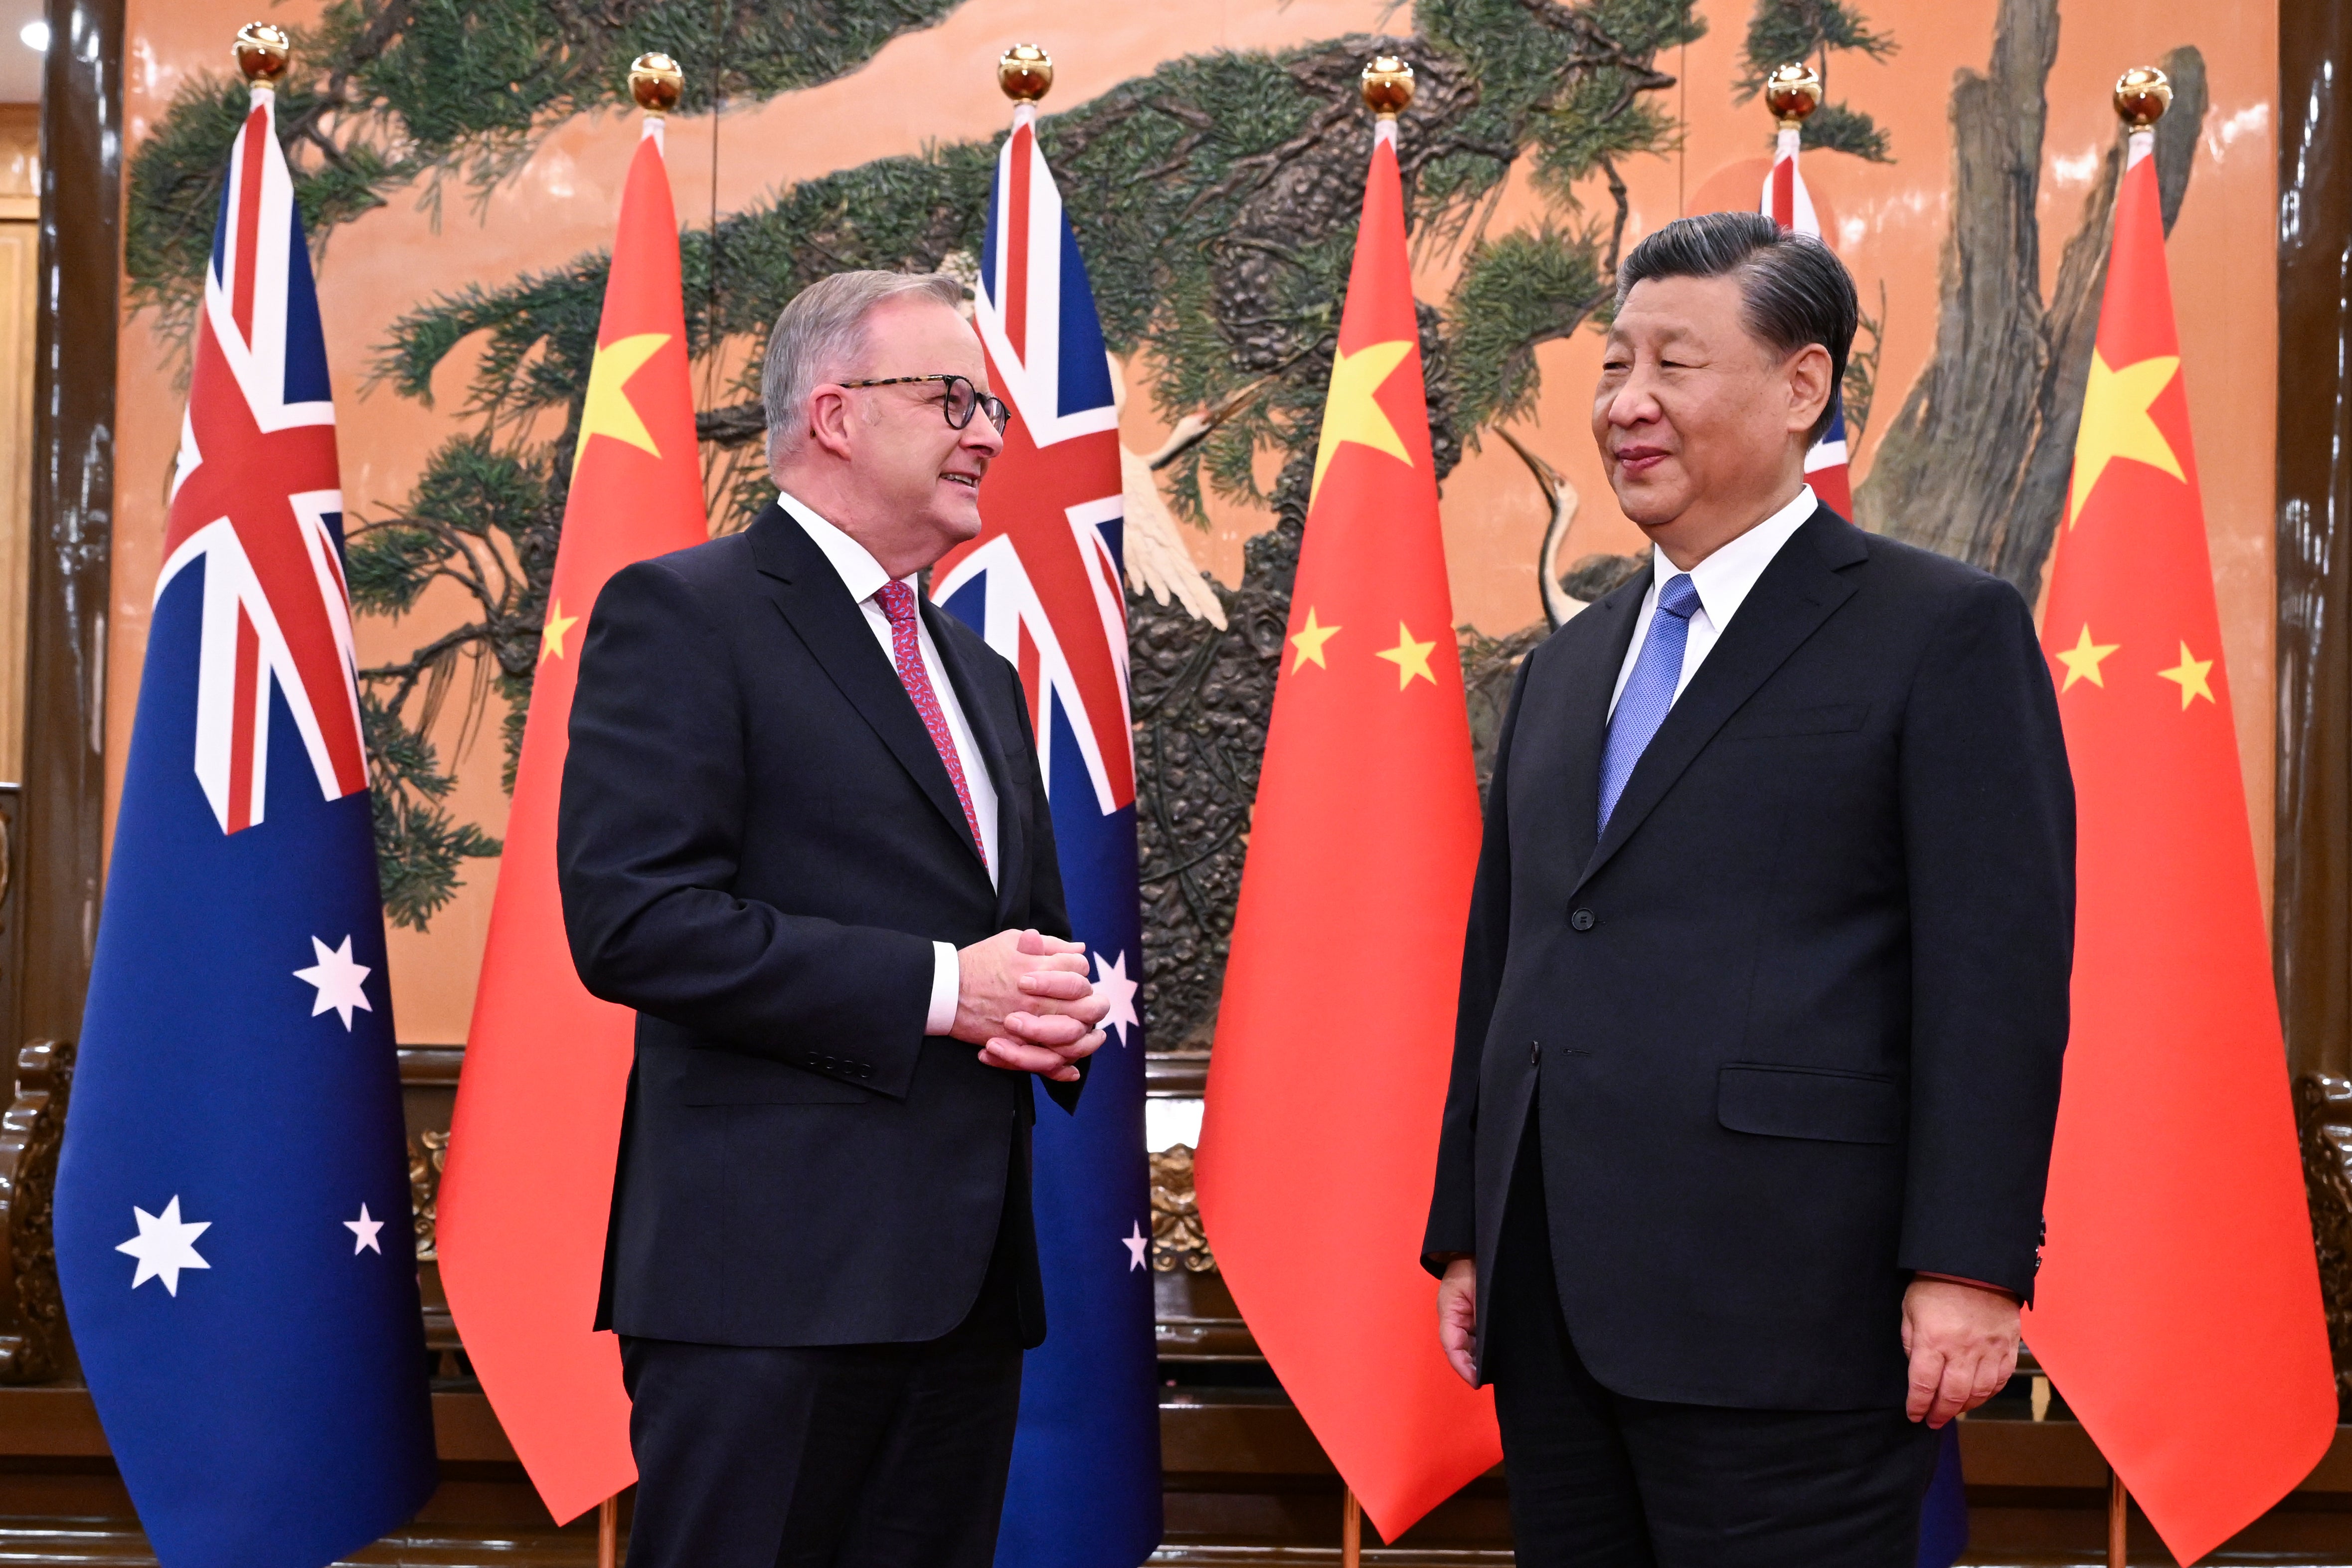 Australia's Prime Minister Anthony Albanese, left, meets with China's President Xi Jinping at the Great Hall of the People in Beijing